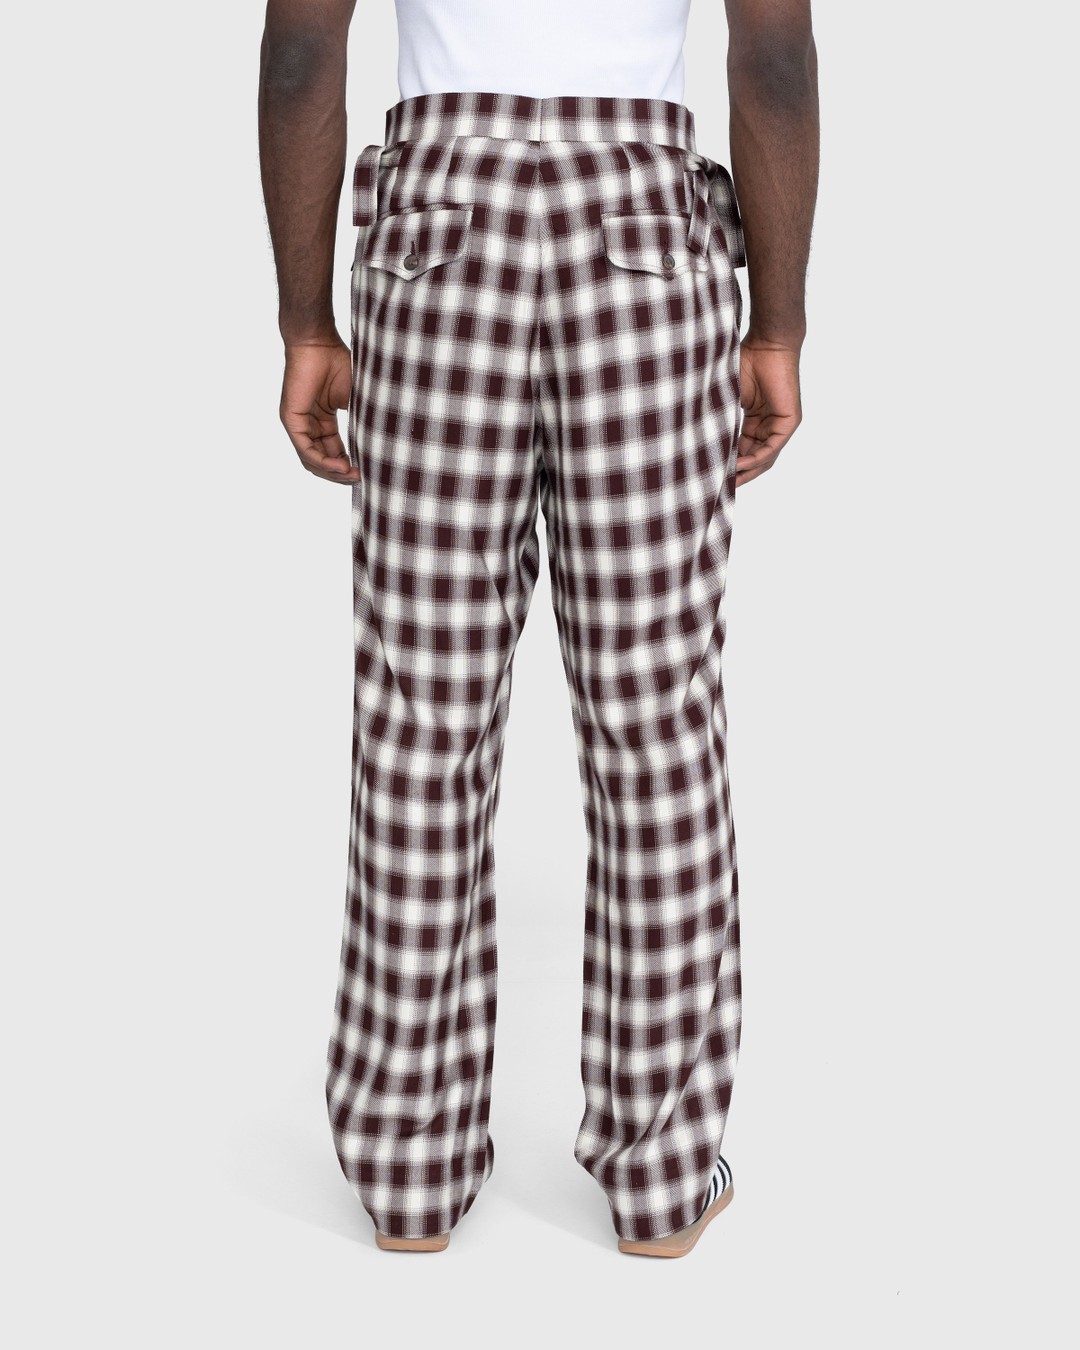 Bode – Shadow Plaid Side-Tie Trousers Brown - Trousers - Brown - Image 4